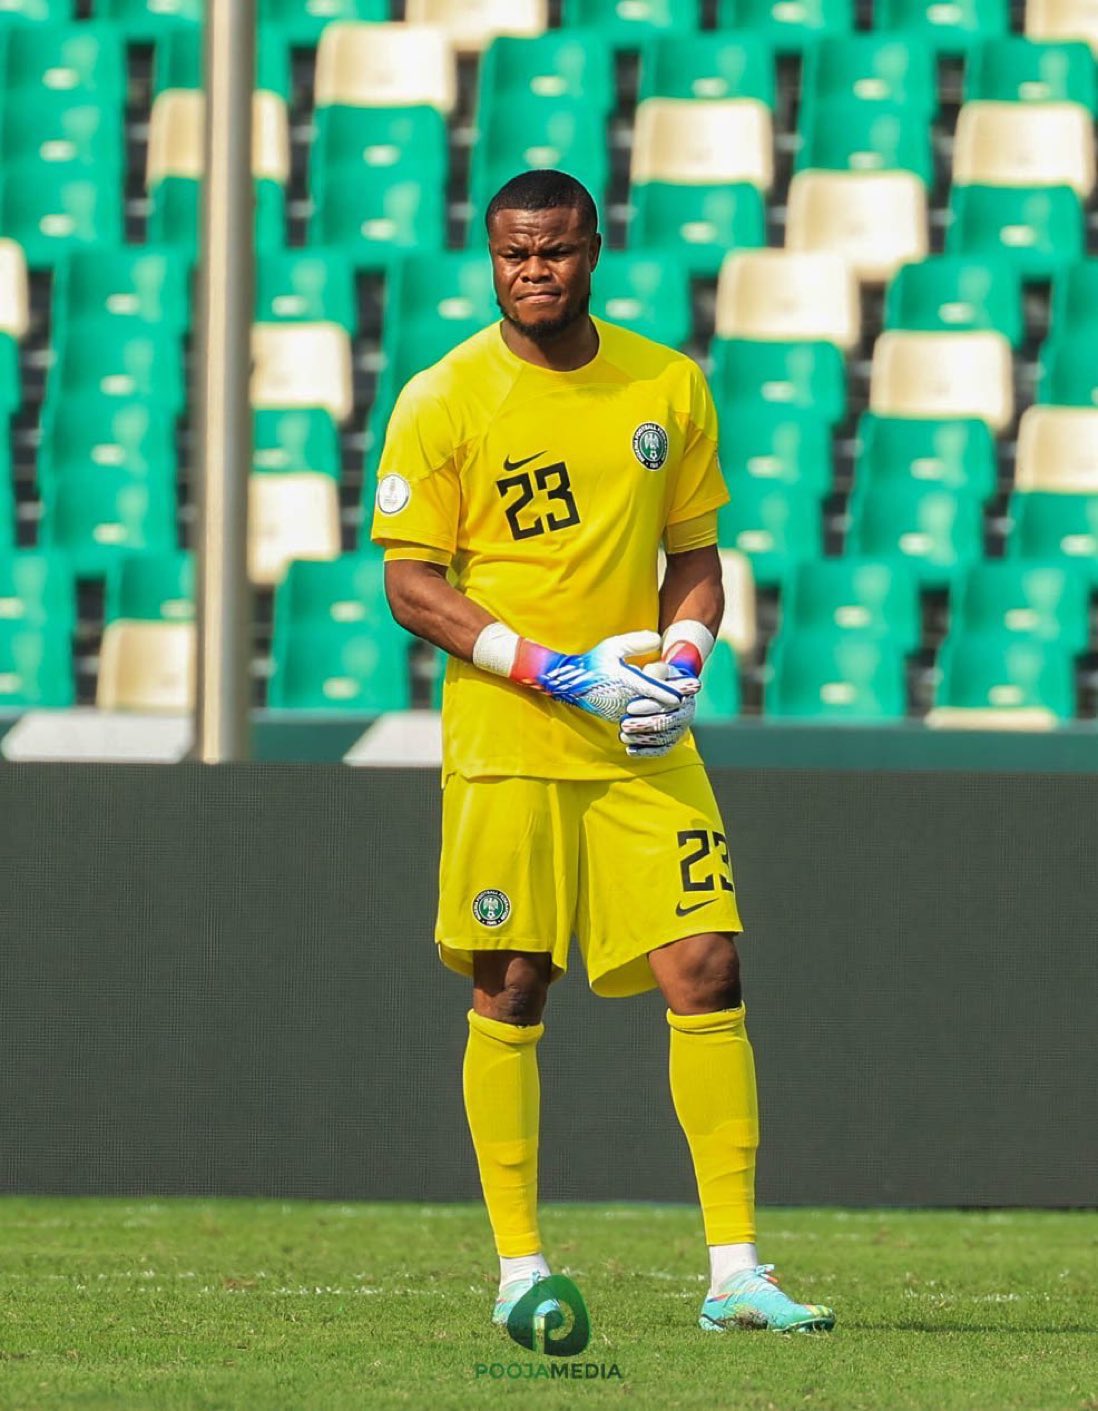 AFCON 2023: “Uzoho is still the first choice,” Nwabili